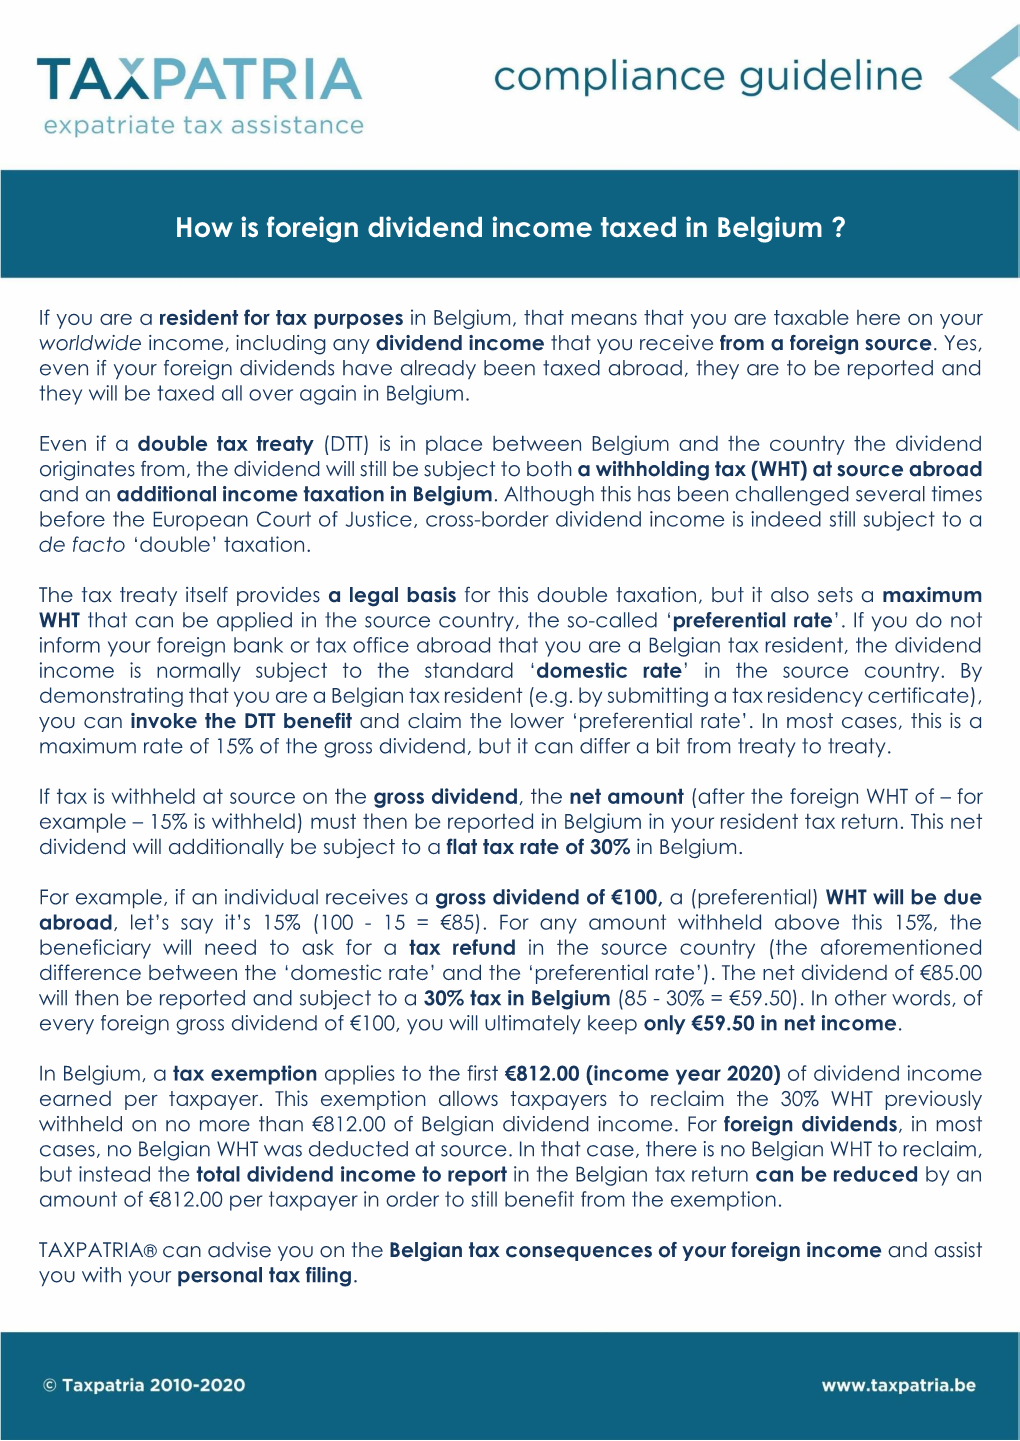 How Is Foreign Dividend Income Taxed in Belgium ?